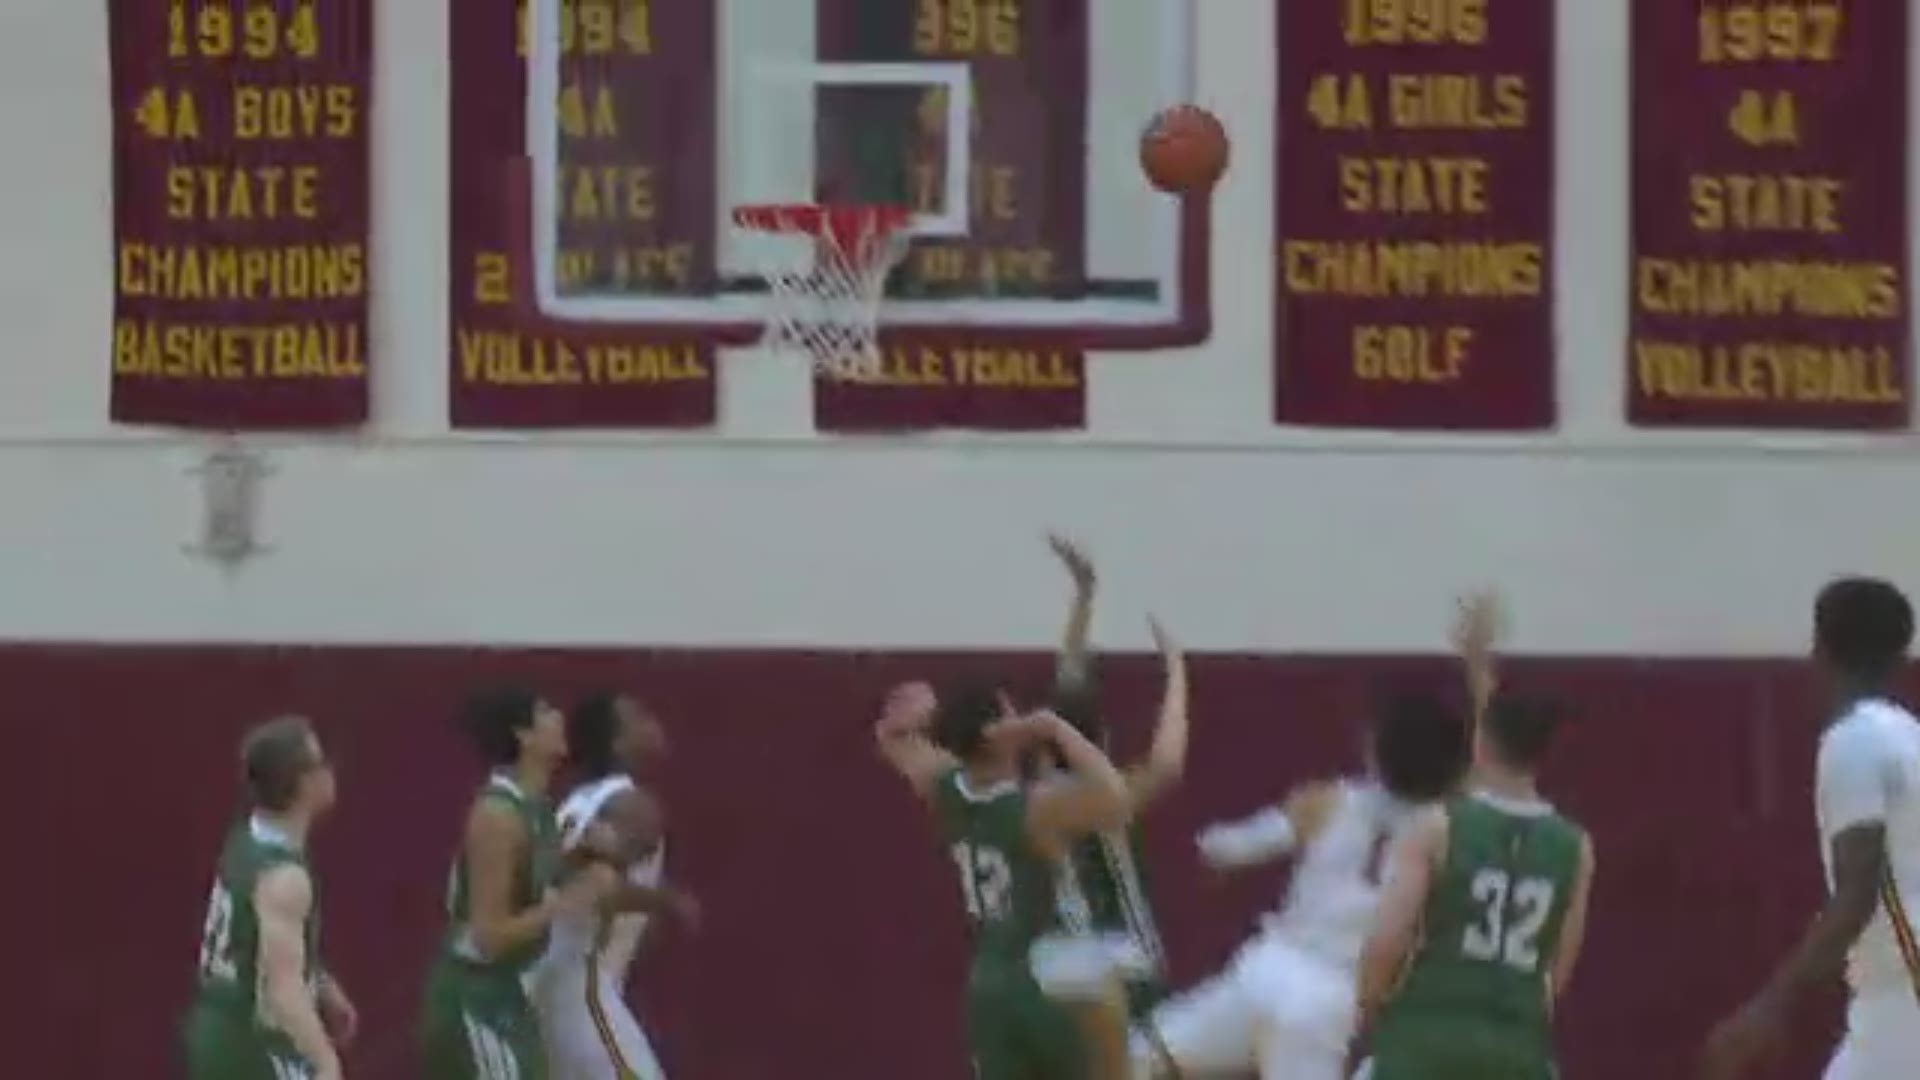 Highlights of the Central Catholic Rams 2019 boys basketball team. Highlights were part of KGW’s Friday Night Hoops coverage. #KGWPreps